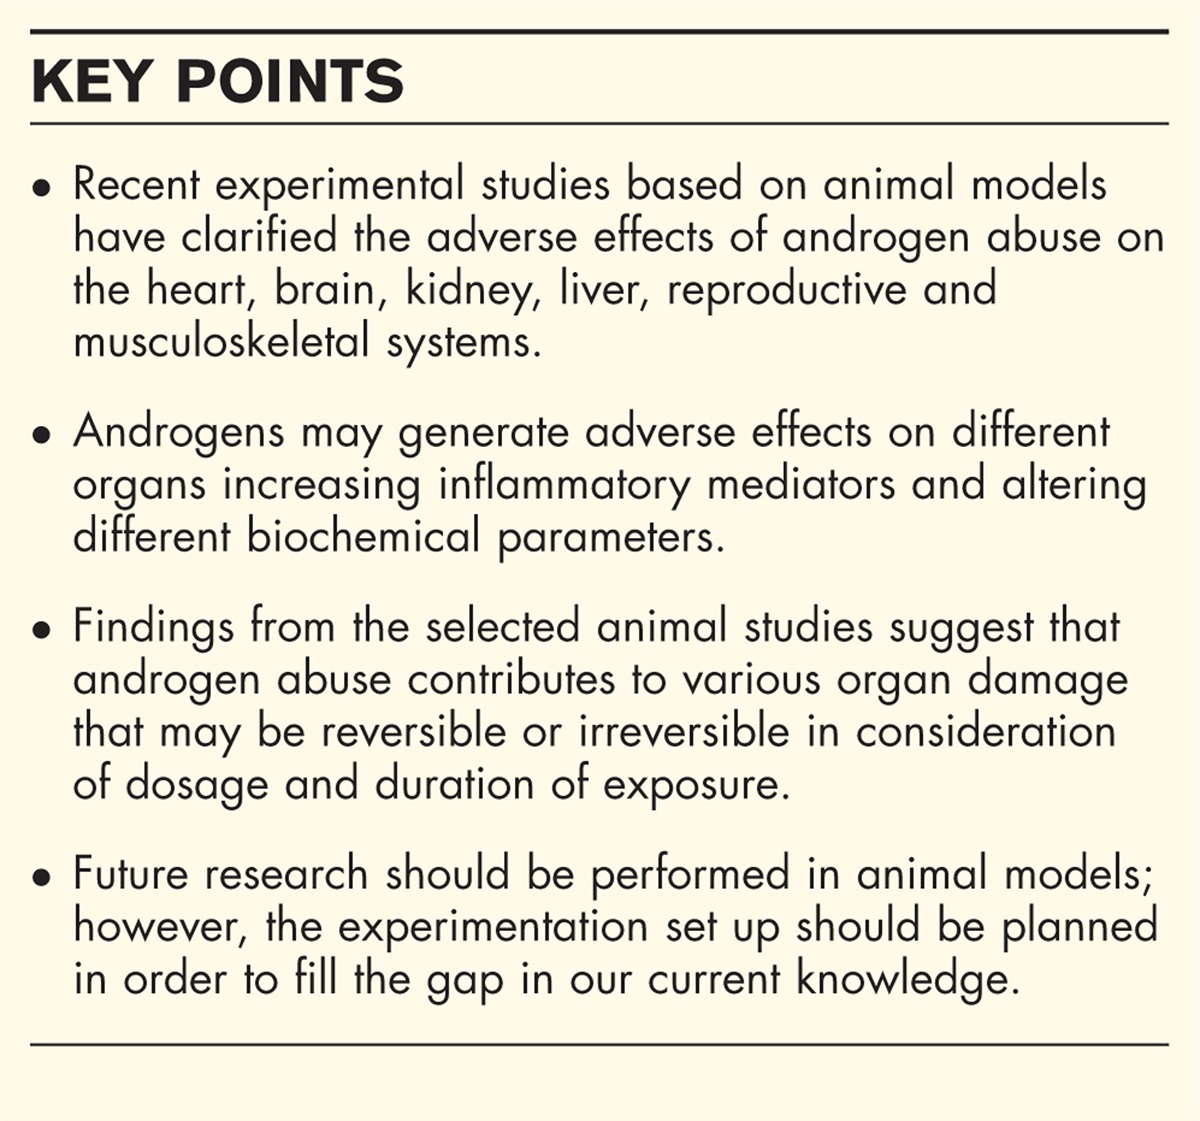 Experimental studies on androgen administration in animal models: current and future perspectives